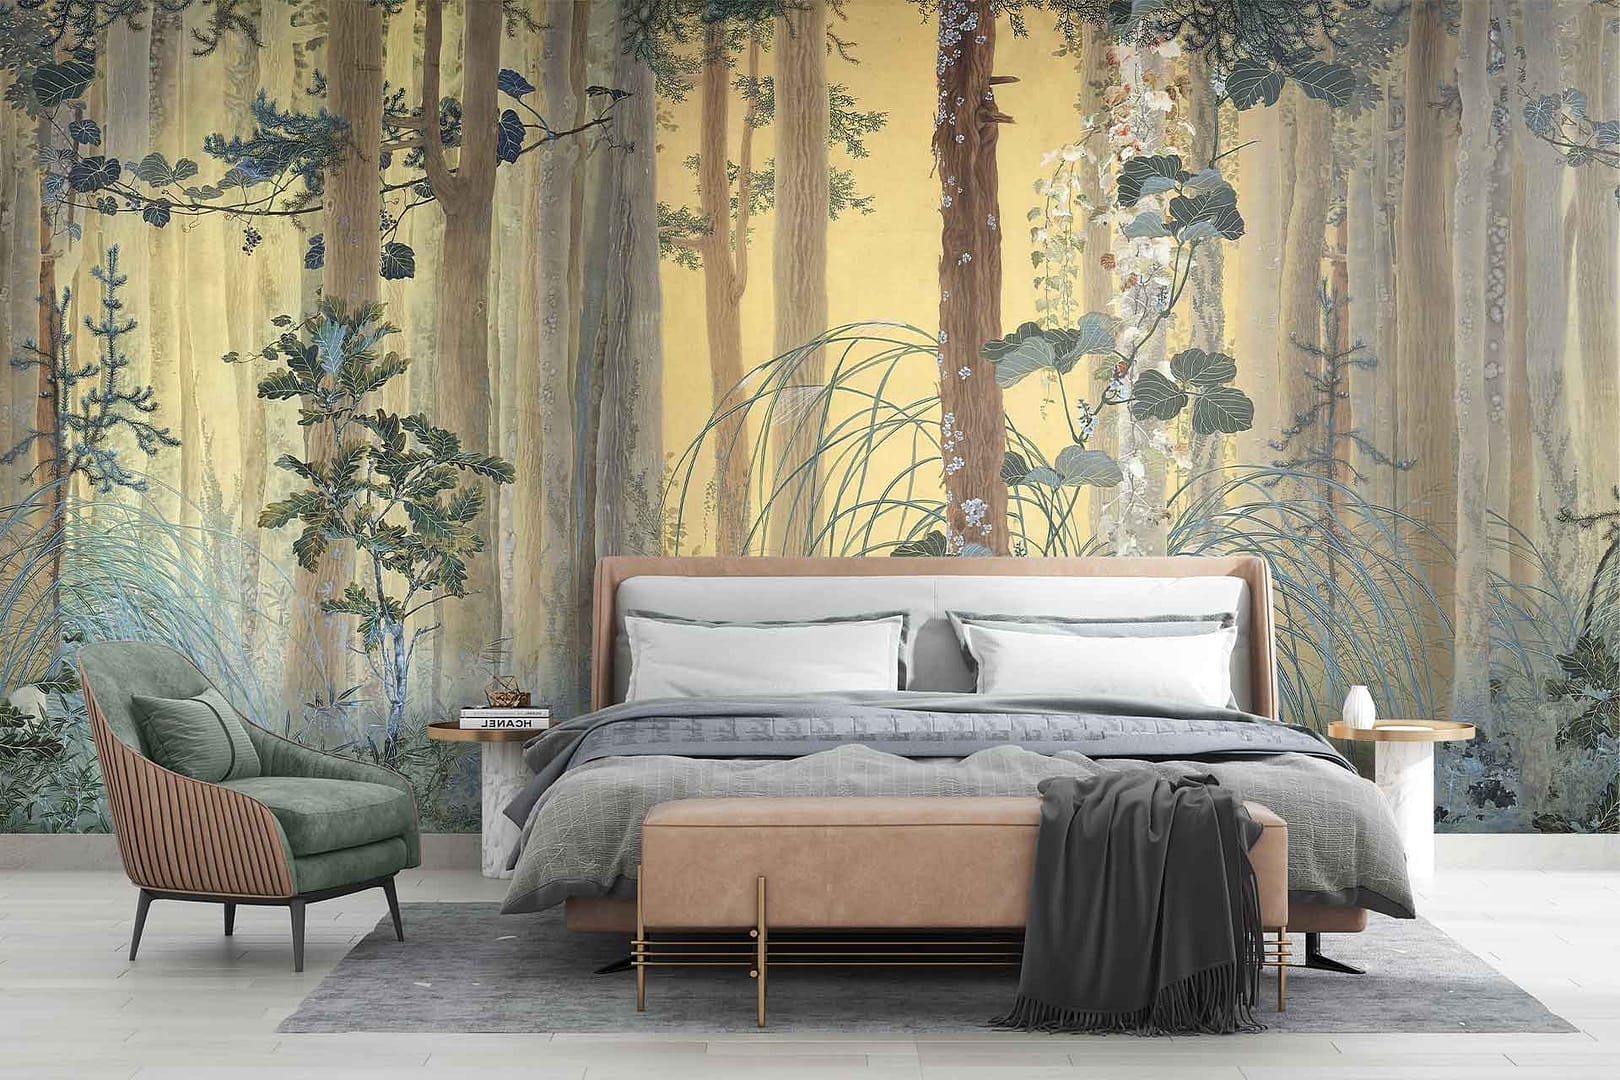 Changing Season - a wallpaper made up of a magical forest landscape, various flowers and plants around image by Cara Saven Wall Design